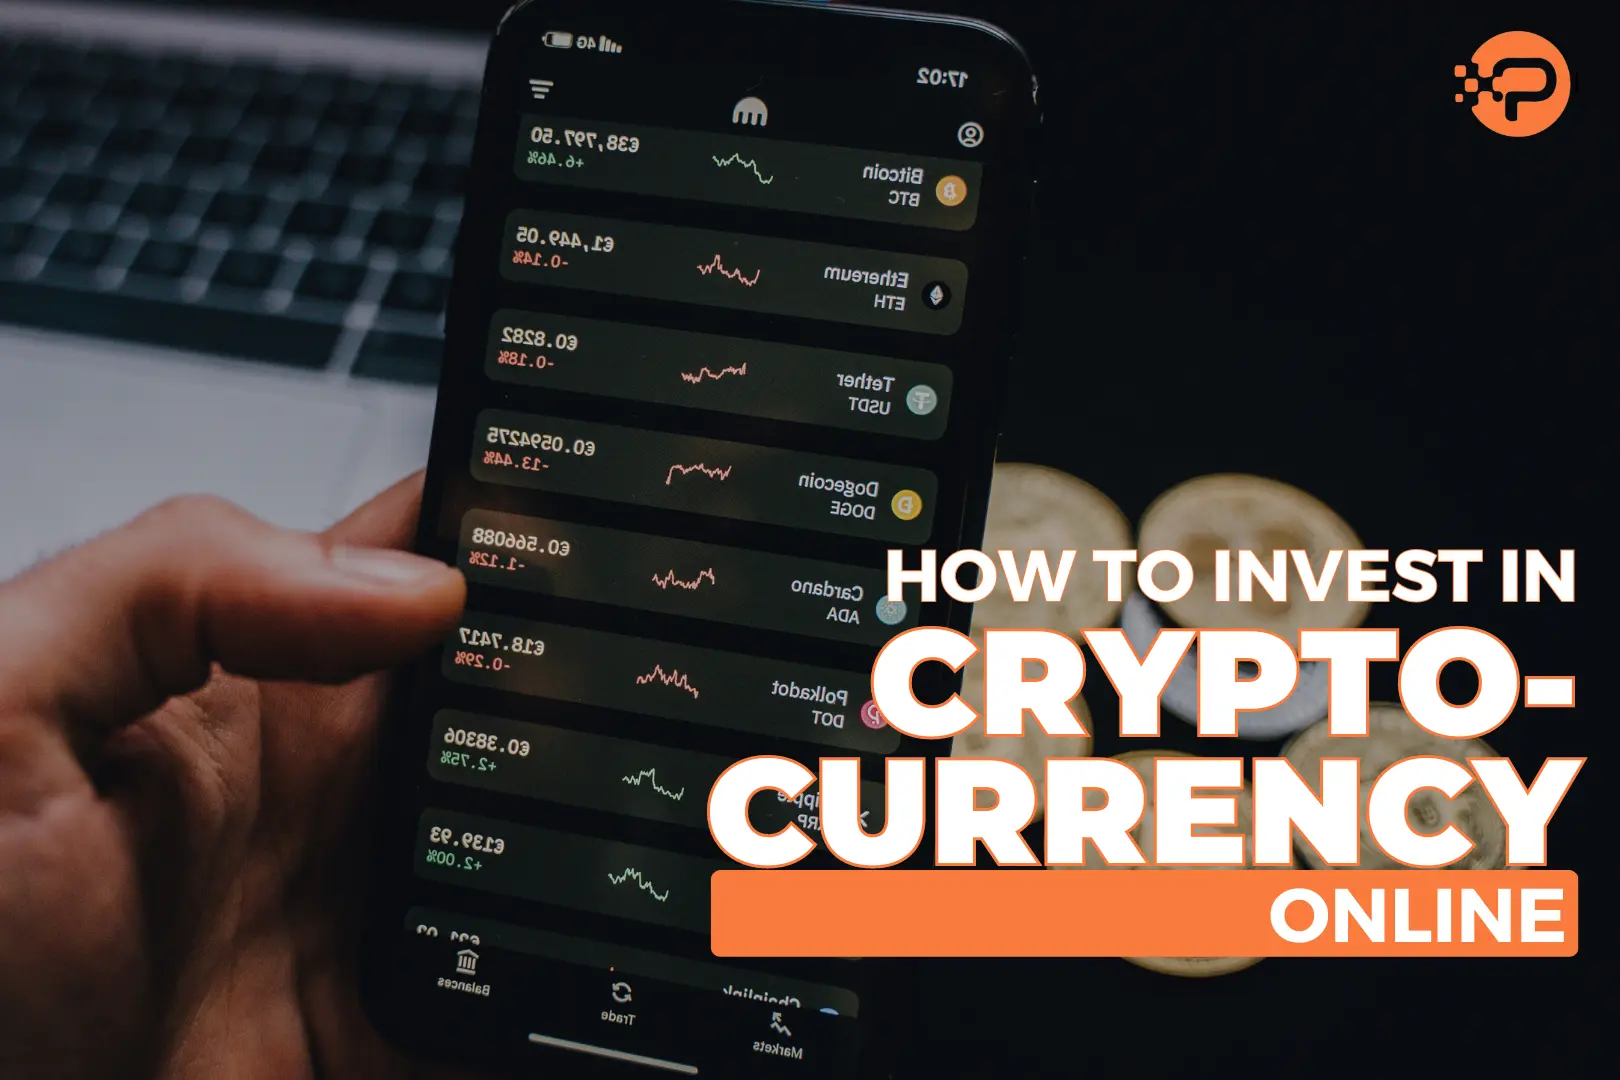 How to Invest in Cryptocurrency Online